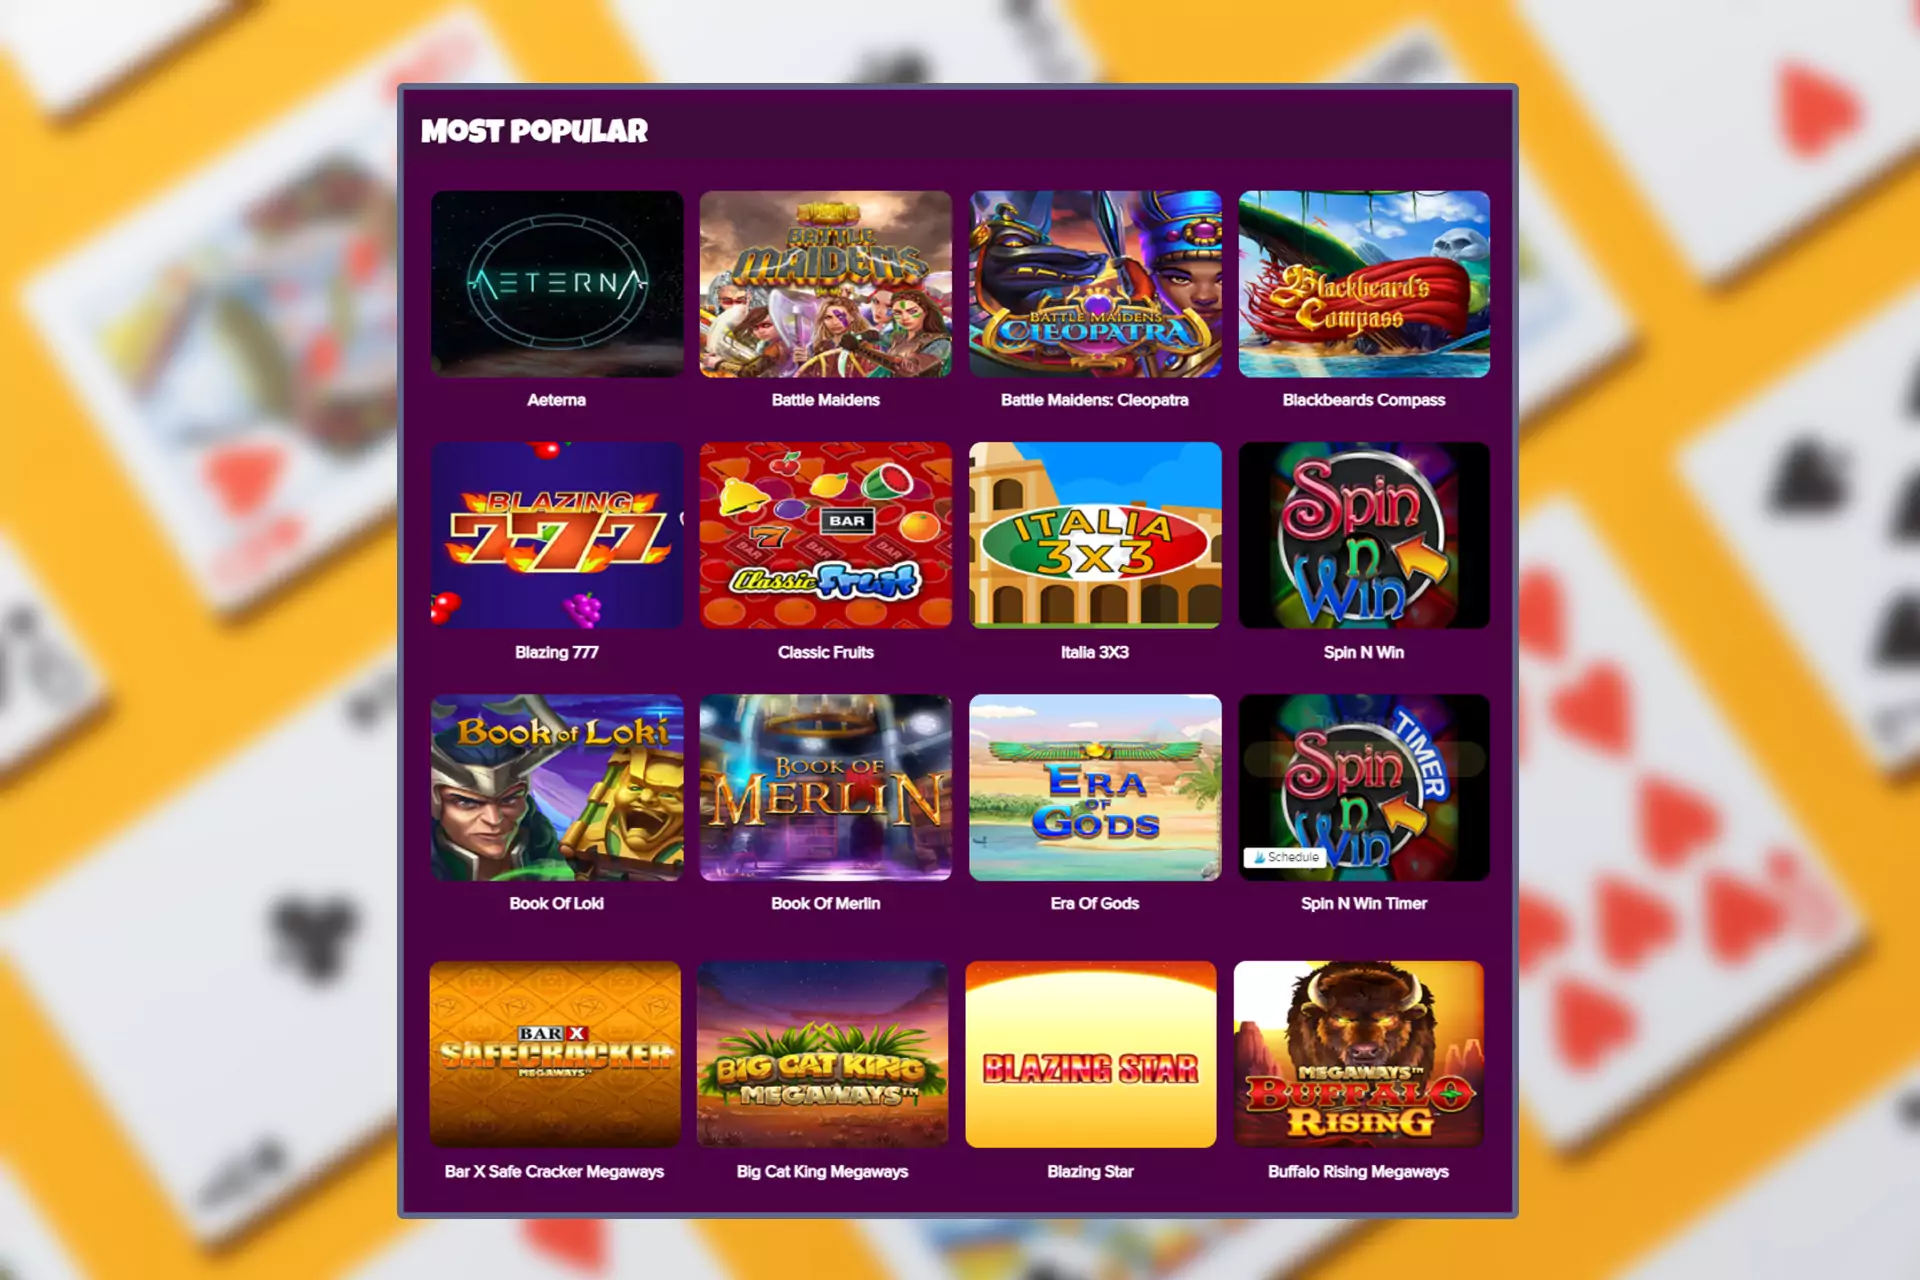 There are lots of casino games for playing fans.